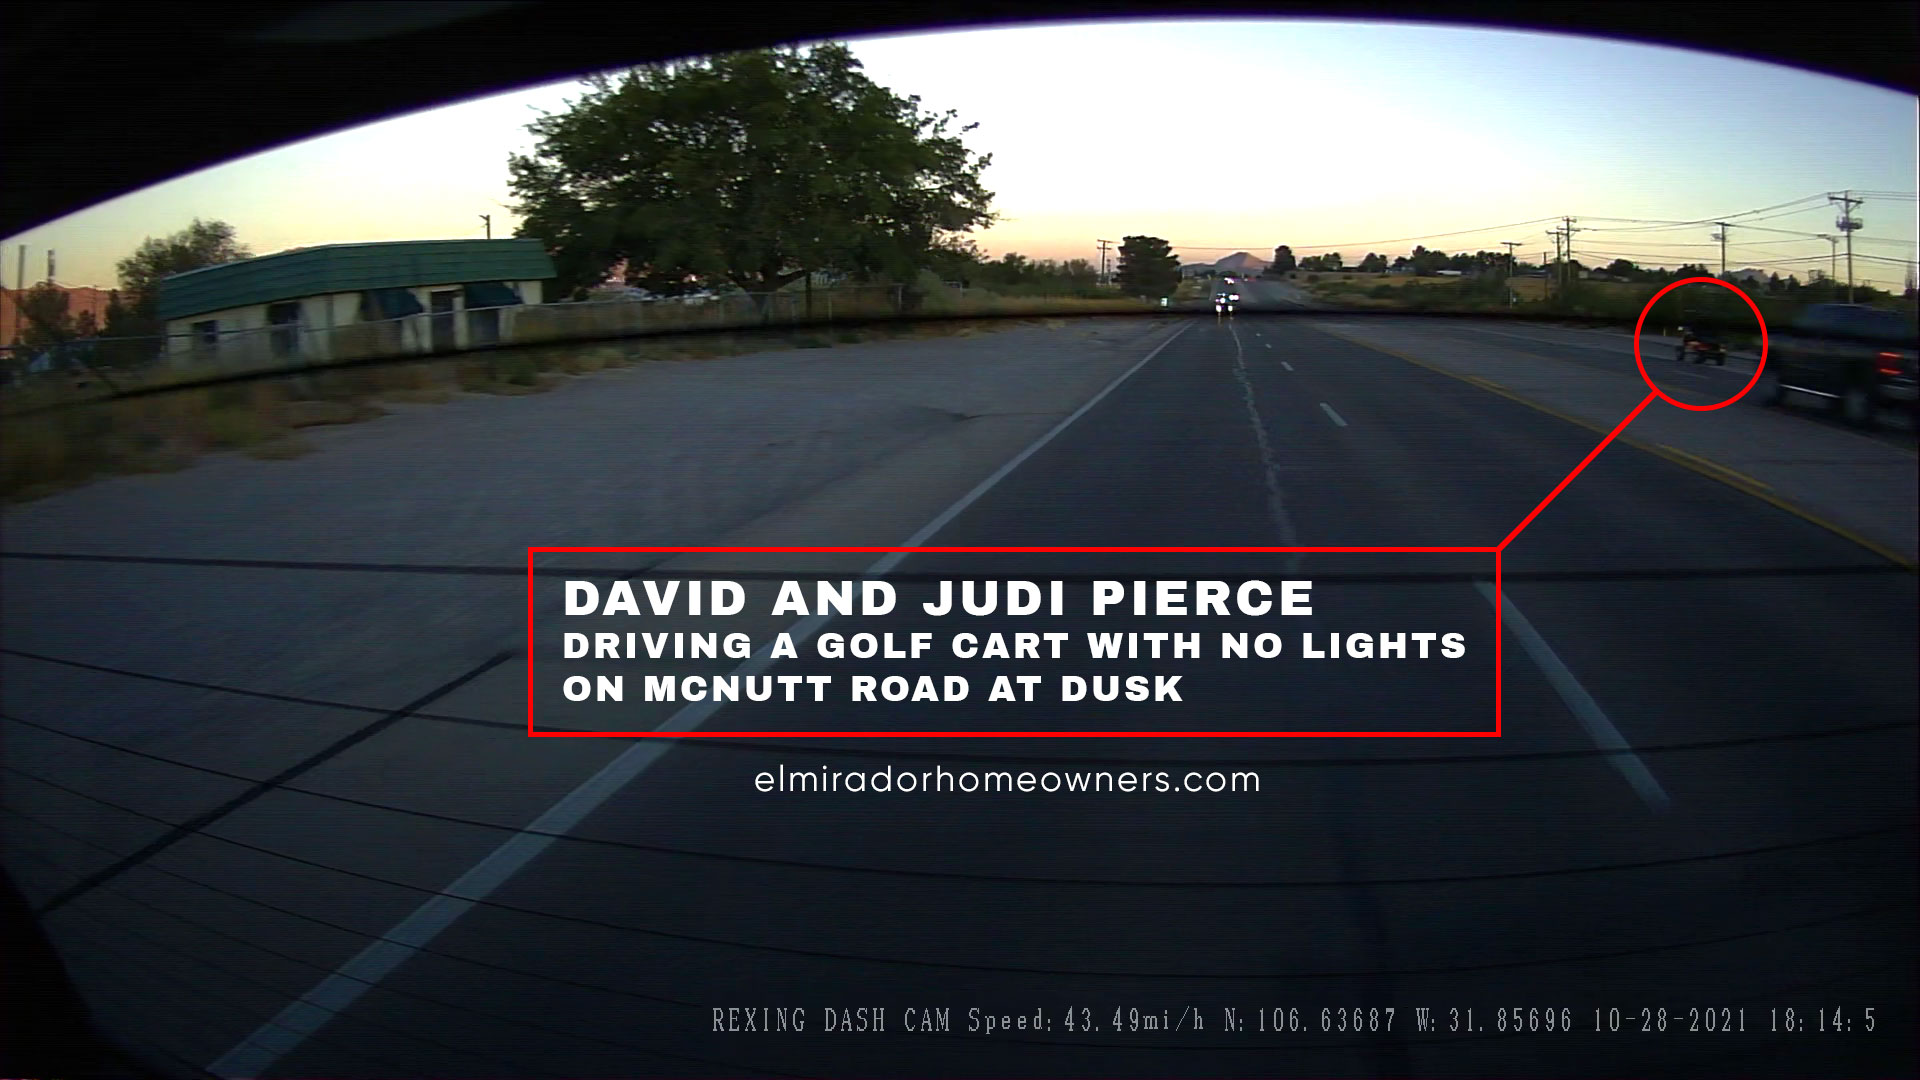 David and Judi Pierce Driving a Golf Cart with No Lights on McNutt Road at Dusk